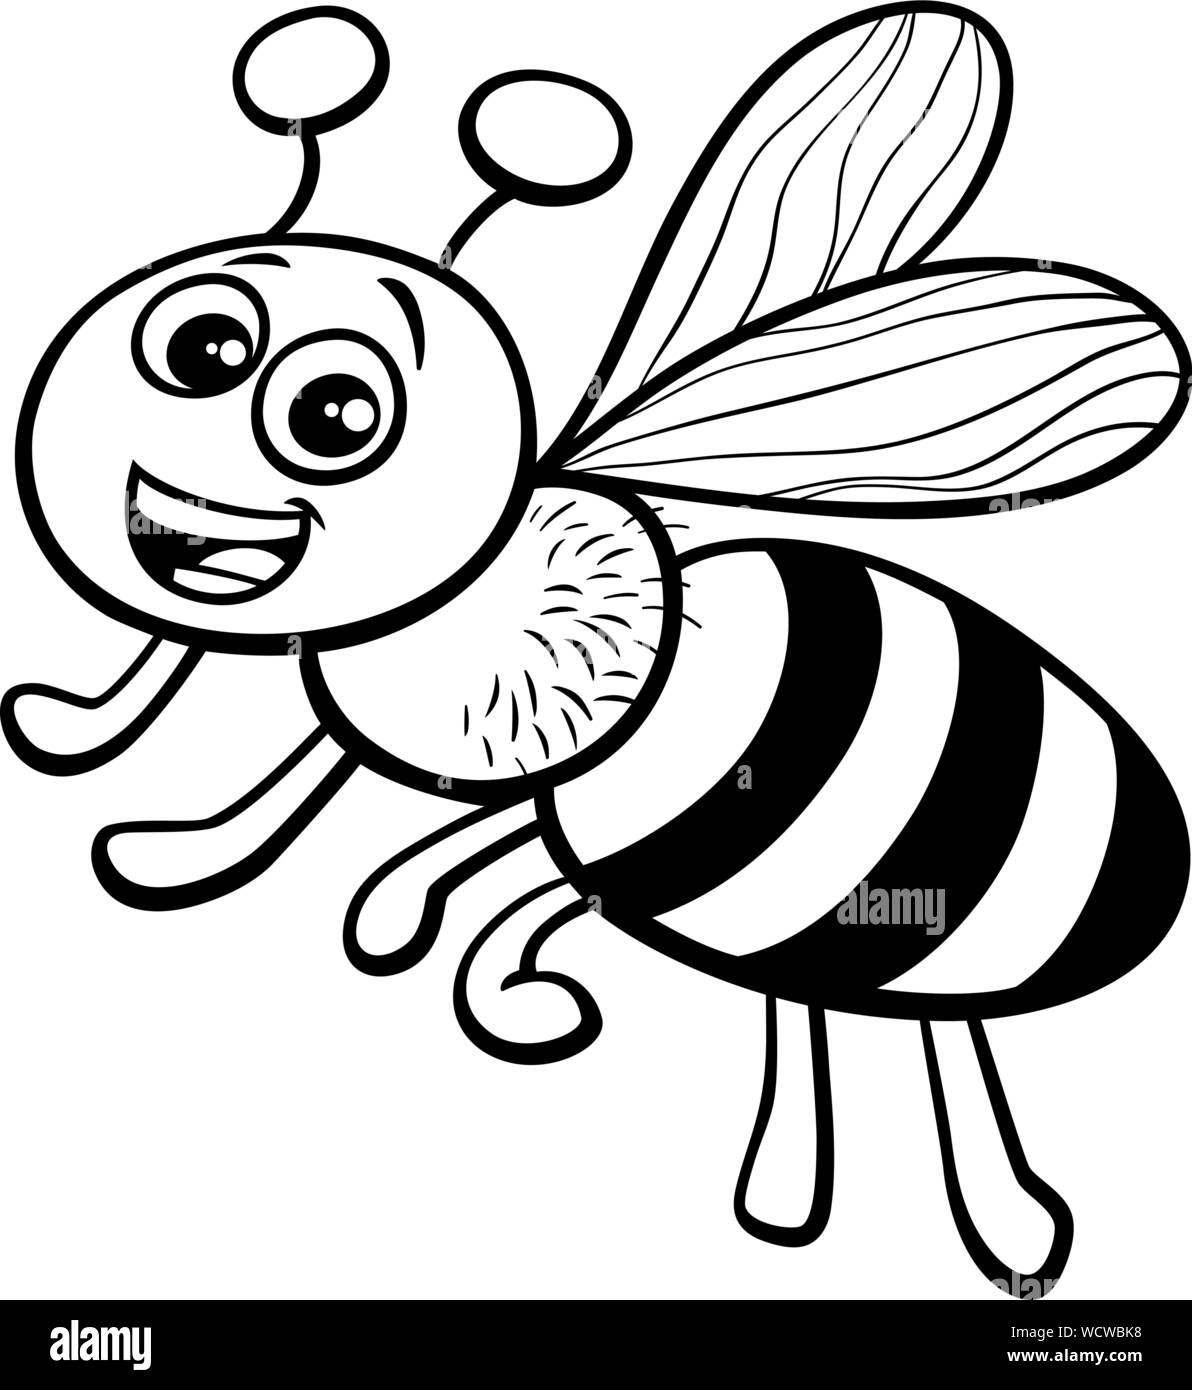 Black and White Cartoon Illustration of Funny Honey Bee Insect Animal Character Coloring Book Stock Vector